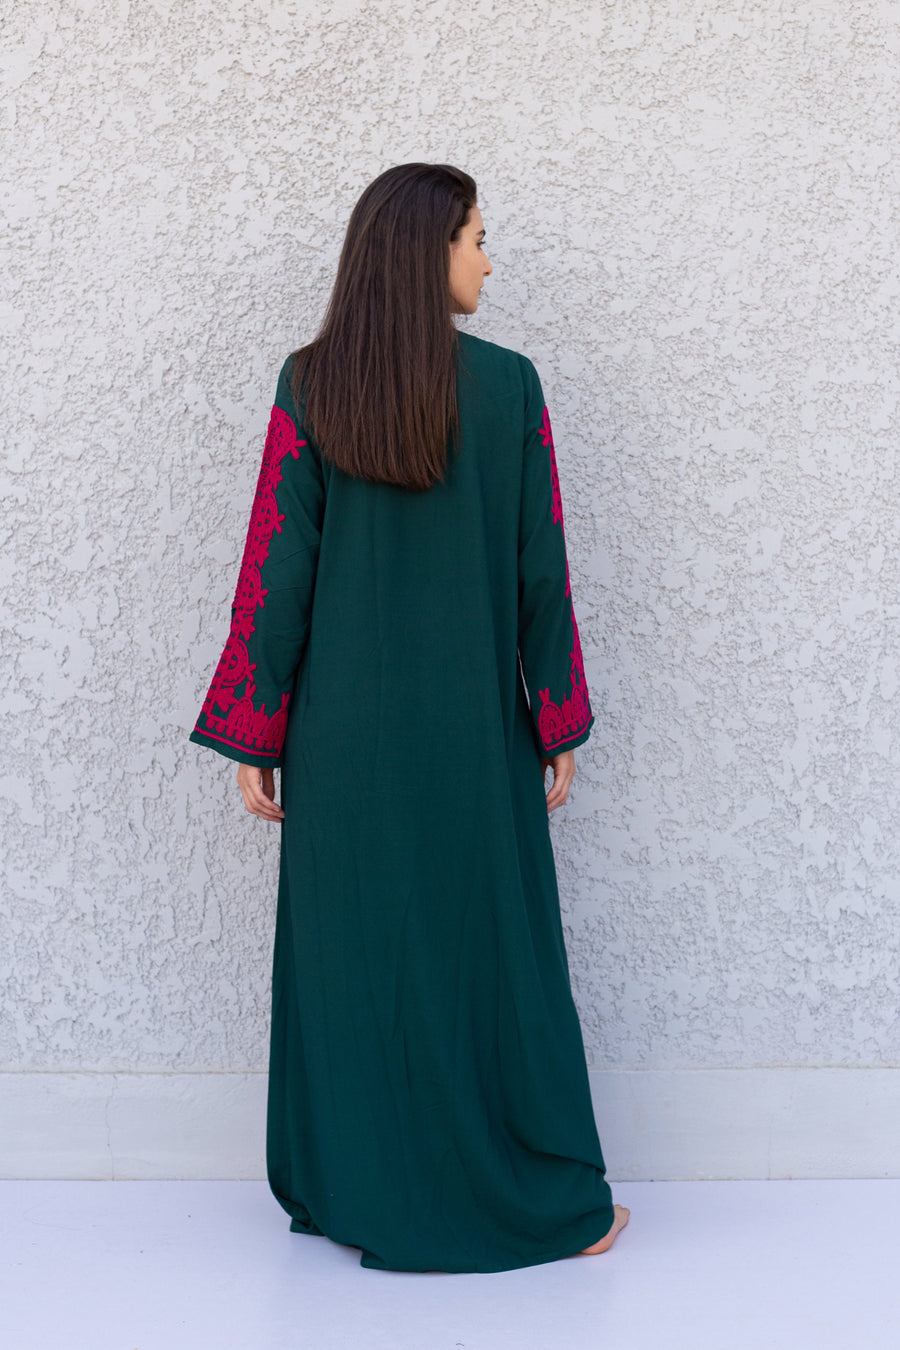 Elegant green embroidered kaftan dress, Cotton caftan max dress, Long sleeve caftan, Chic embroidered caftan, High quality Egyptian cotton